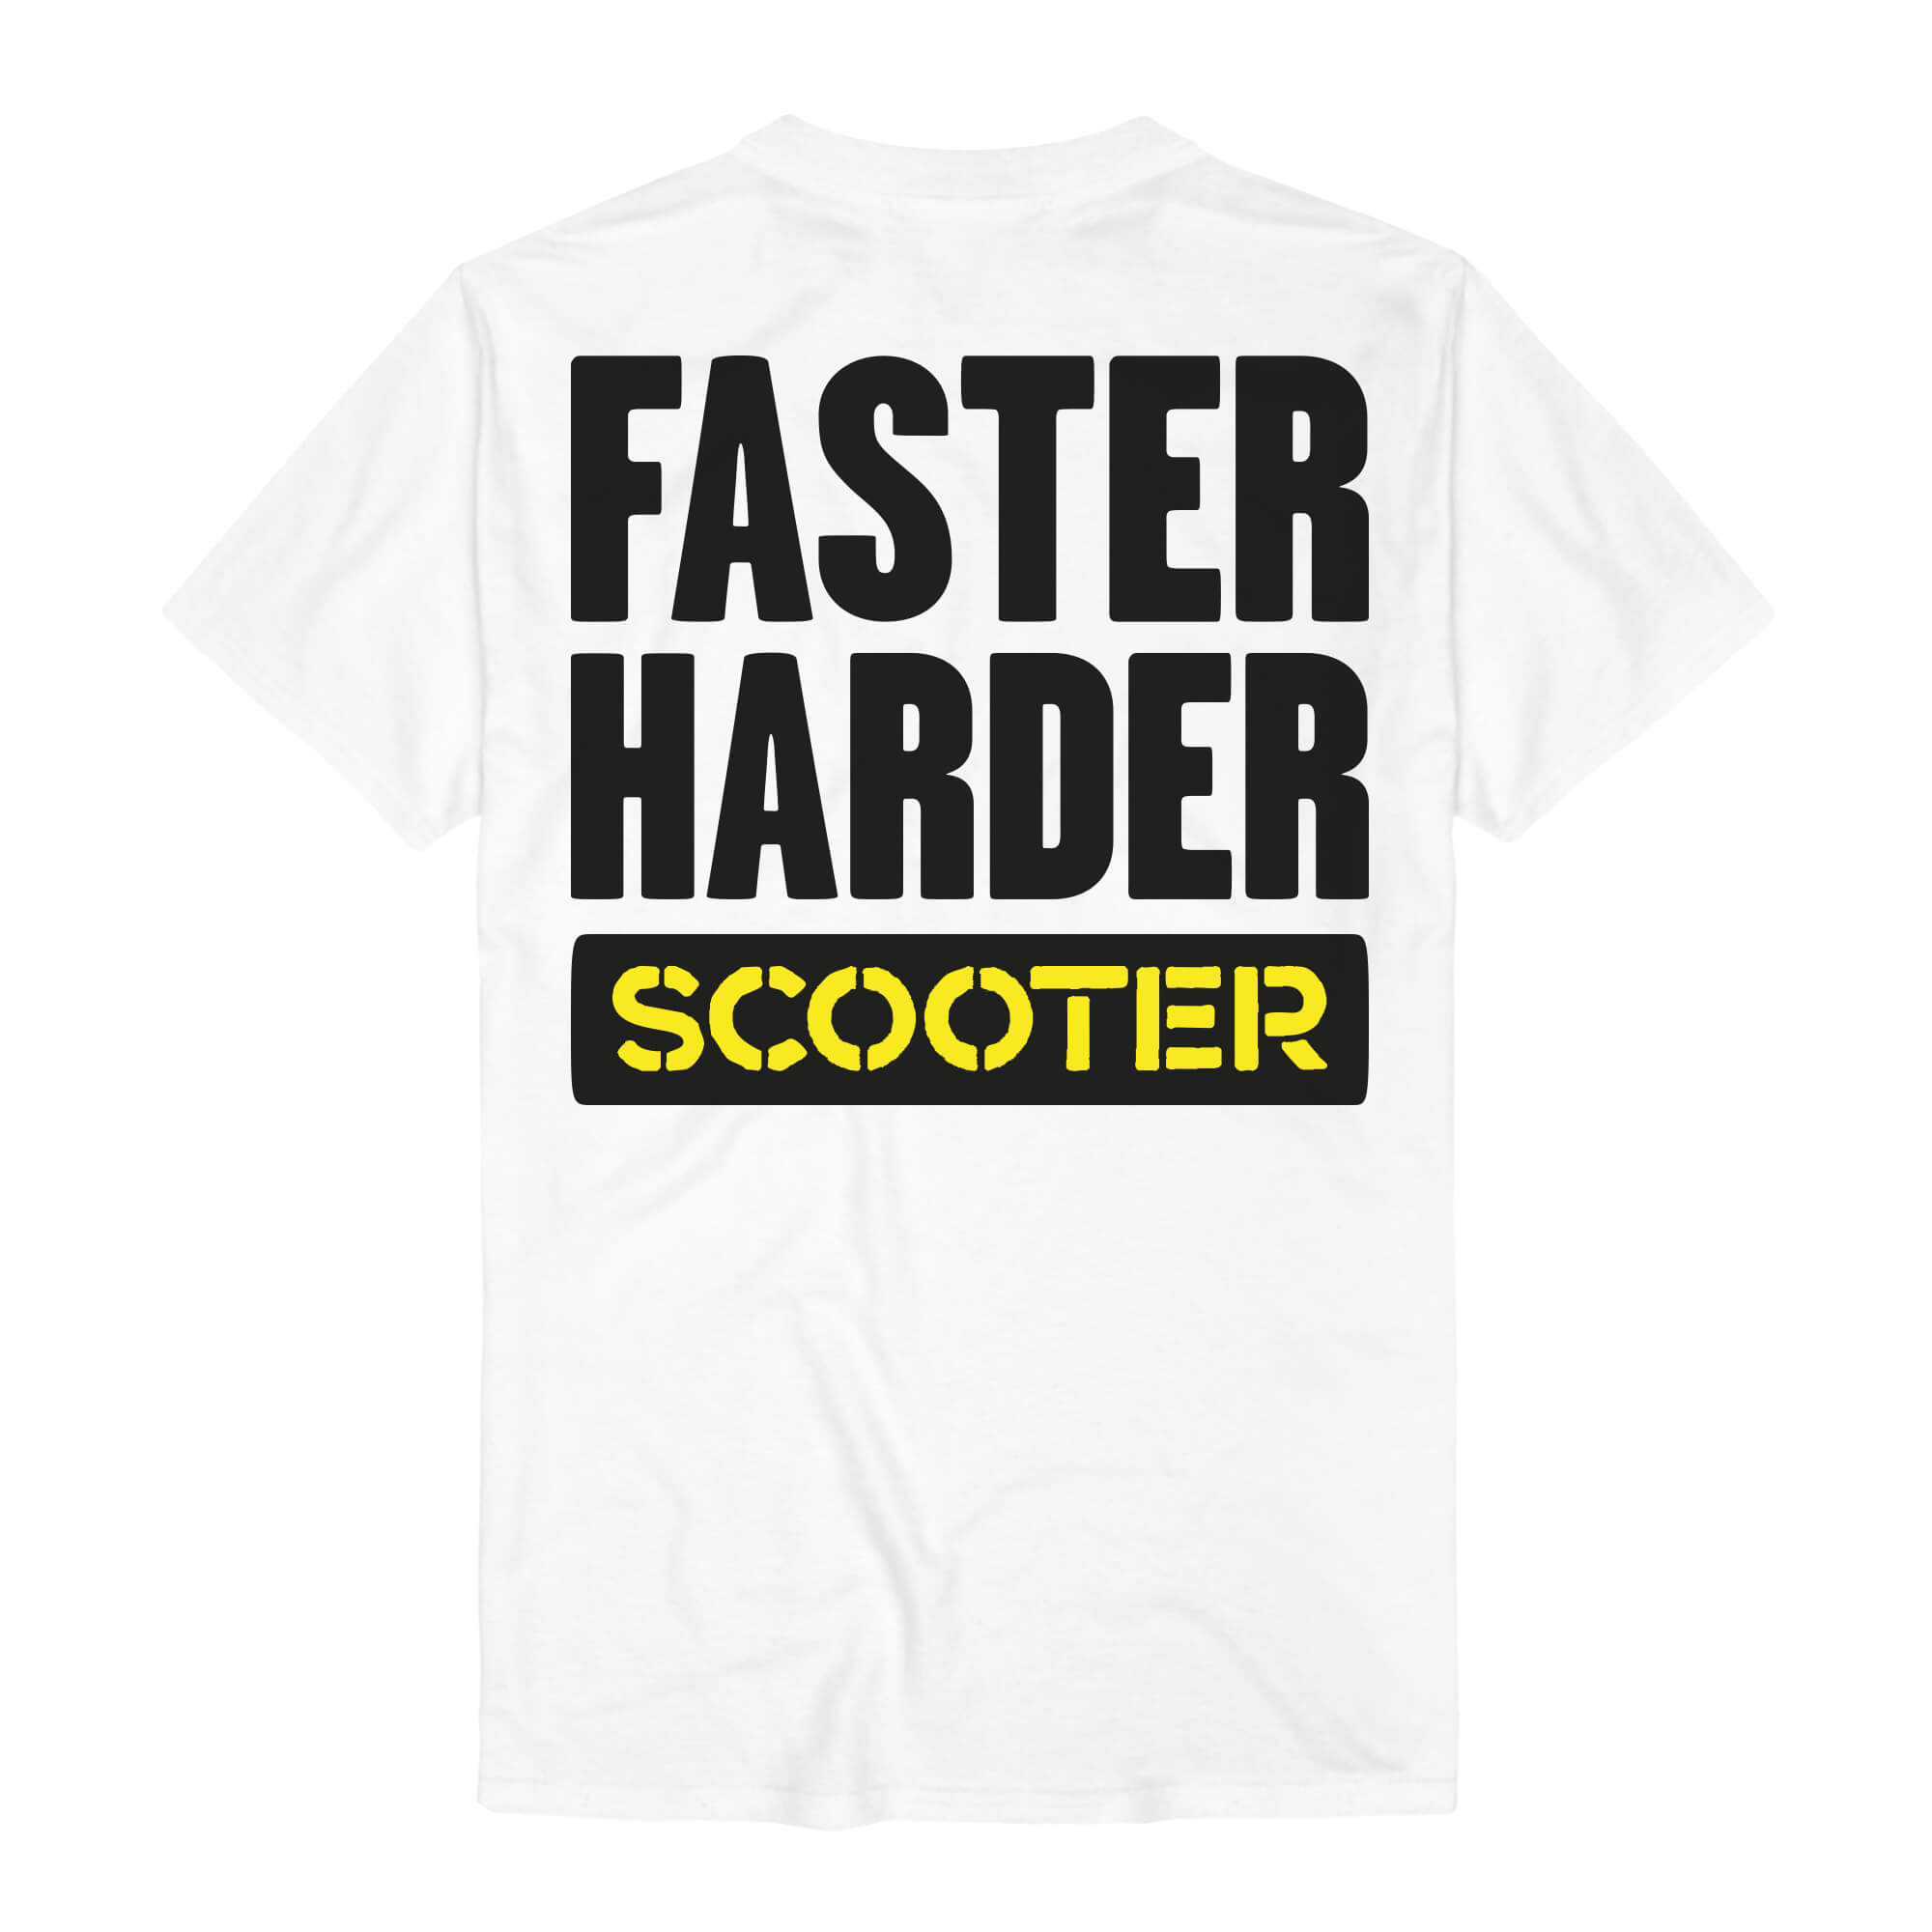 Faster and harder текст. Футболка скутер из 90. Scooters t Shirt. Scooter принты. Scooter faster harder t-Shirt.